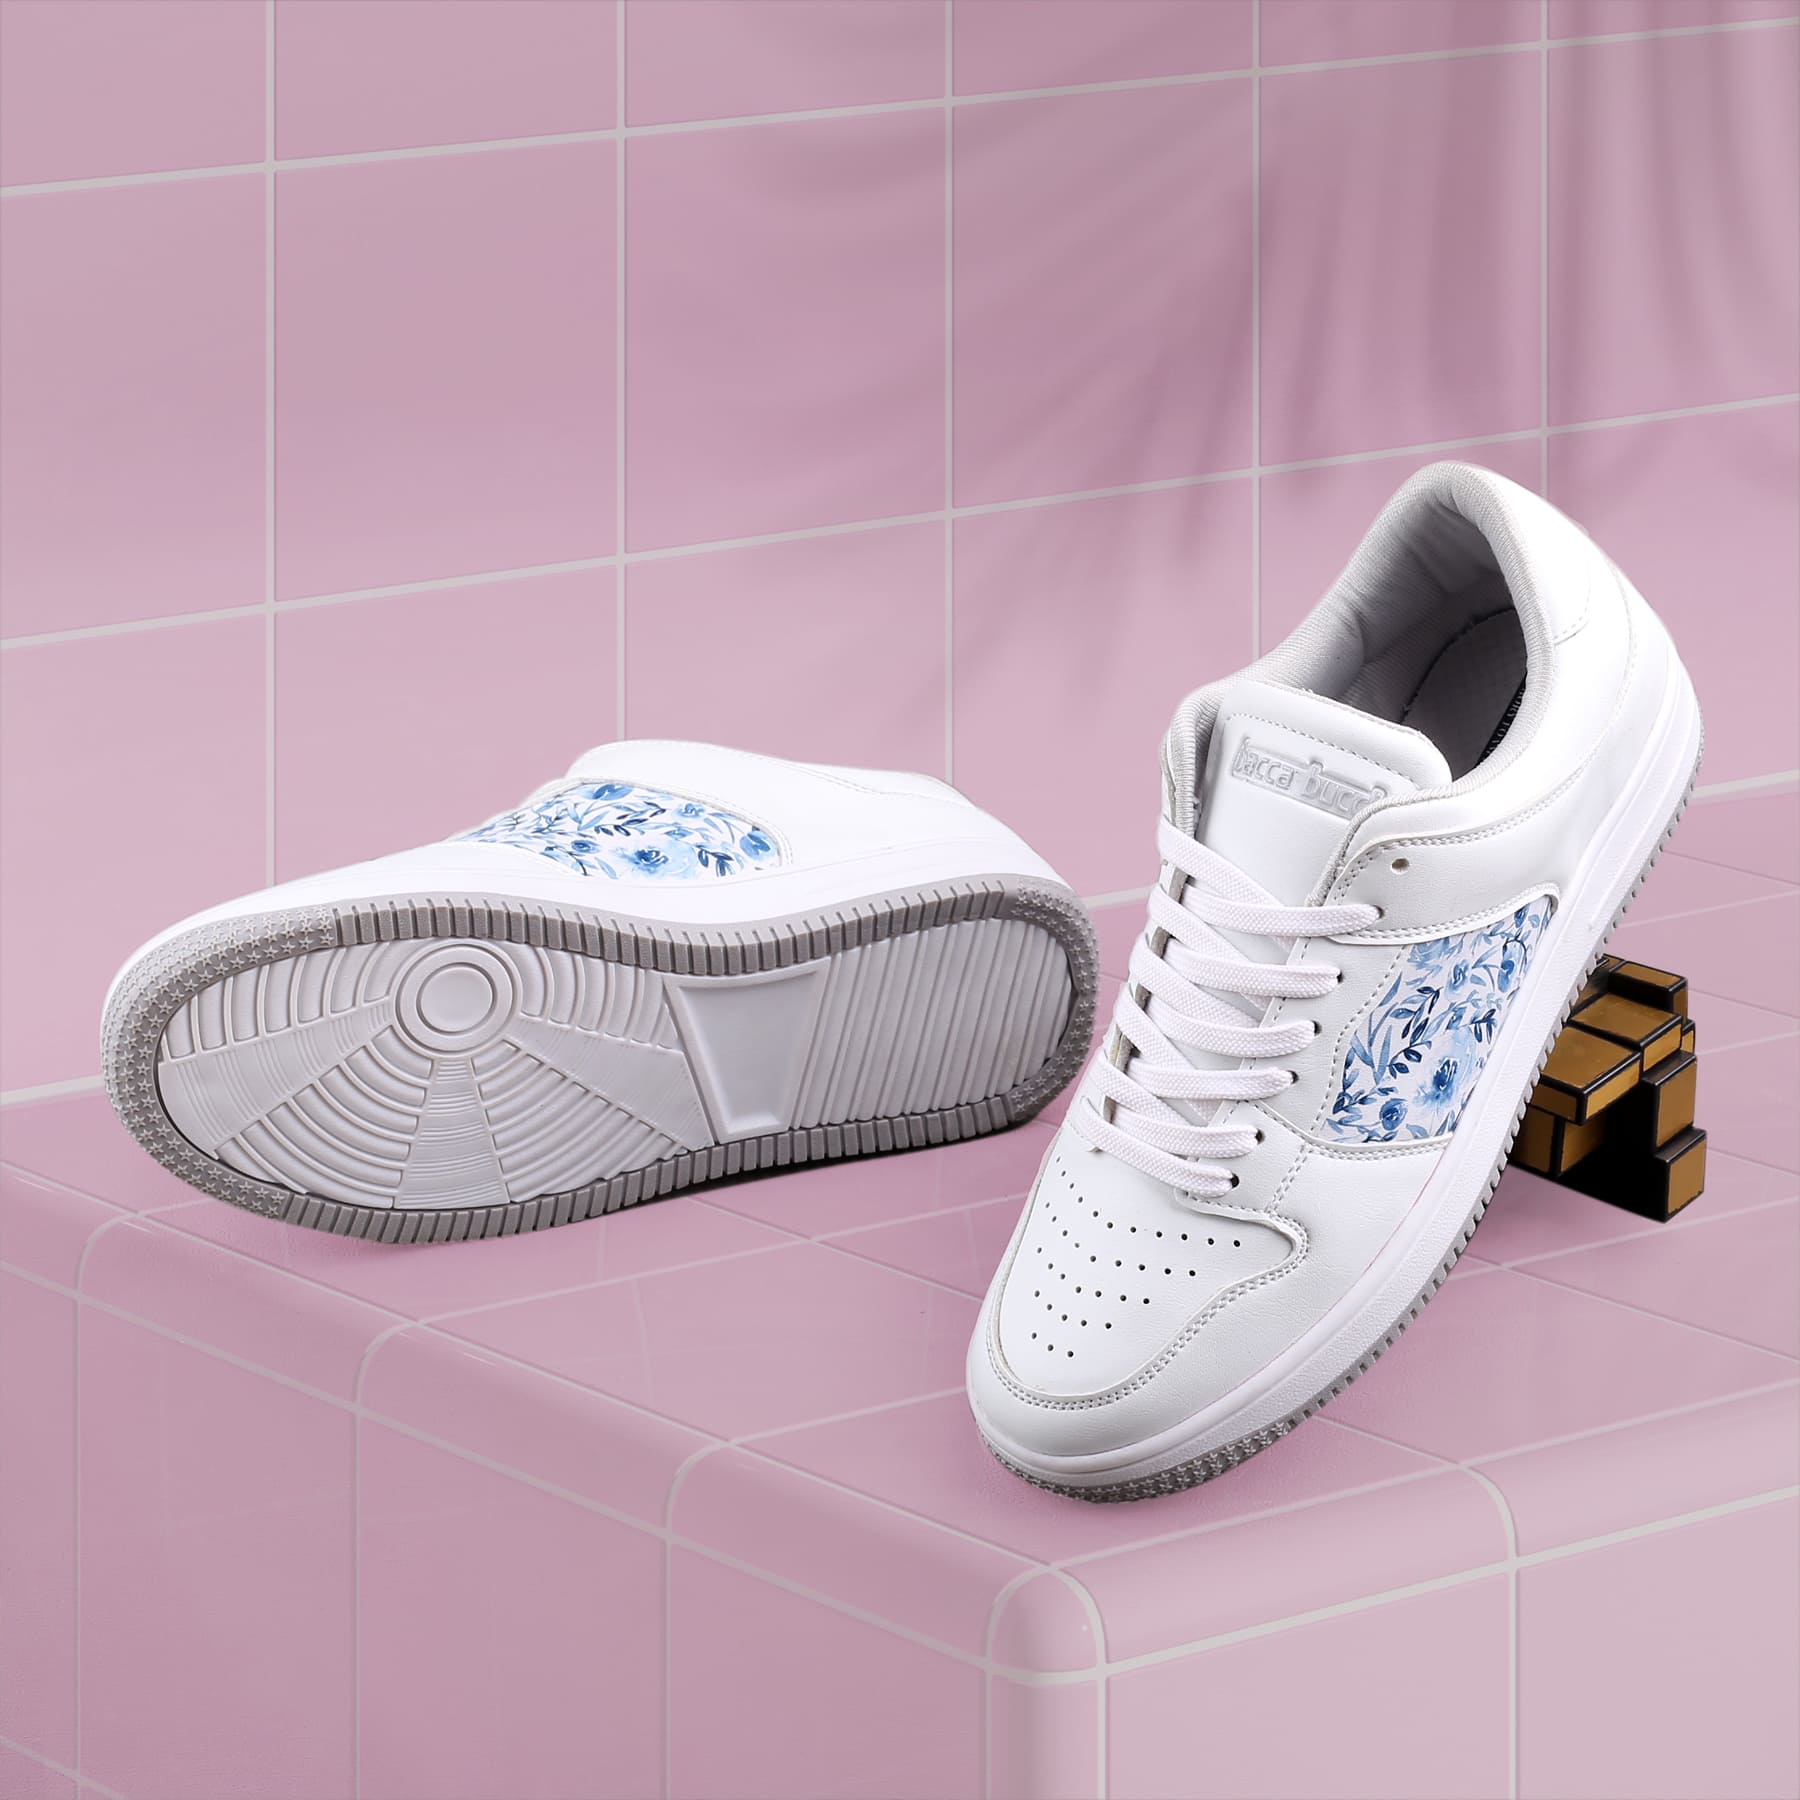 Bacca Bucci BLISS Low Top Flat Sole Fashion Women's Sneakers with Digital Prints